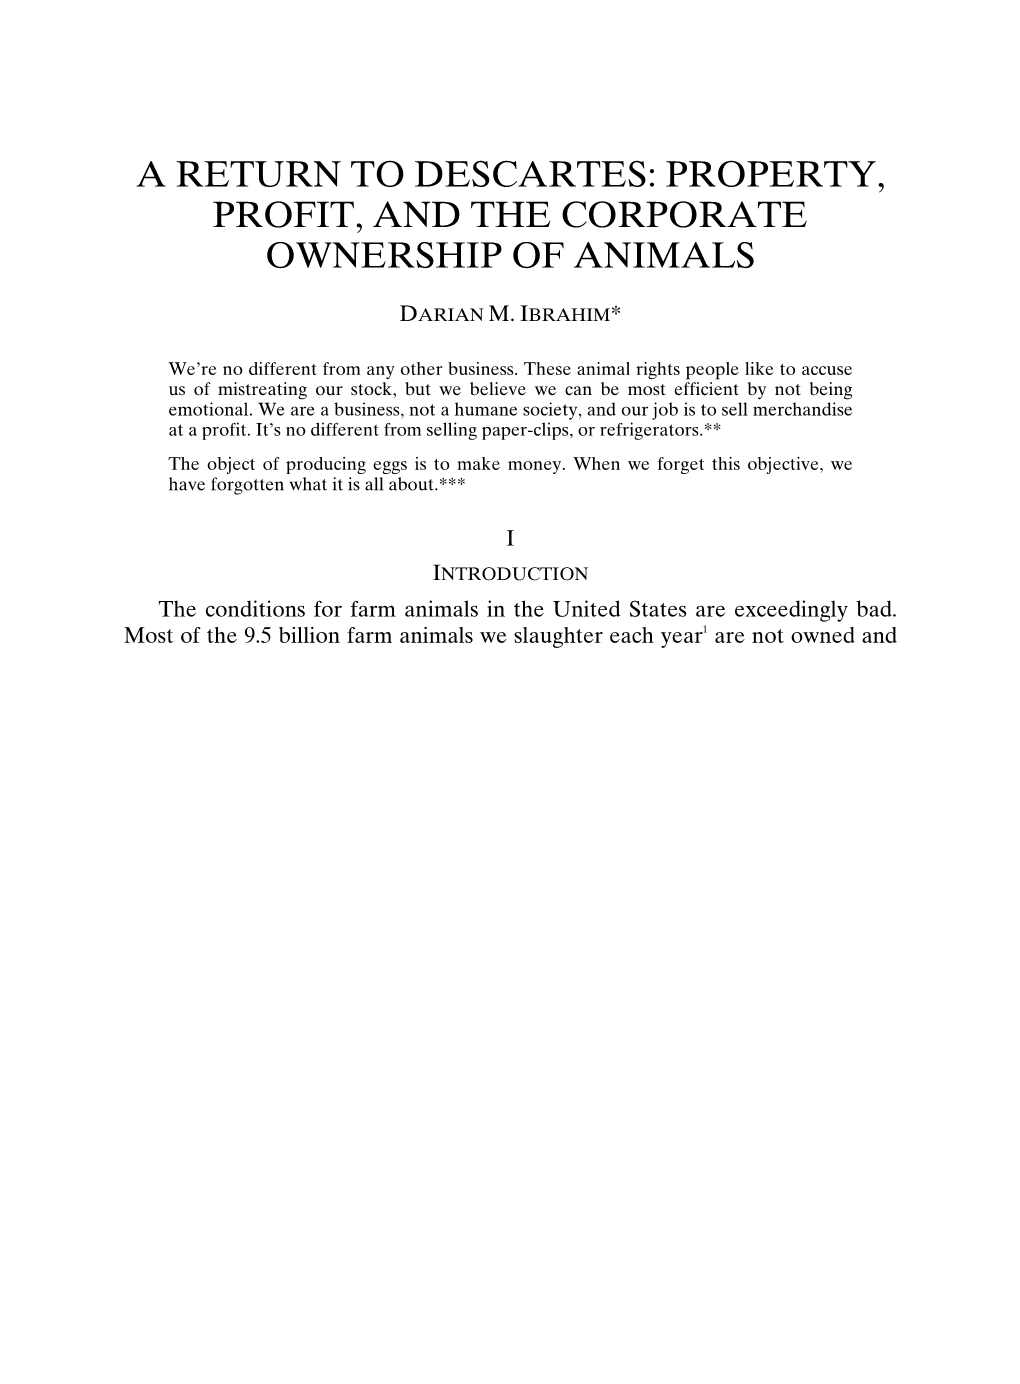 A Return to Descartes: Property, Profit, and the Corporate Ownership of Animals